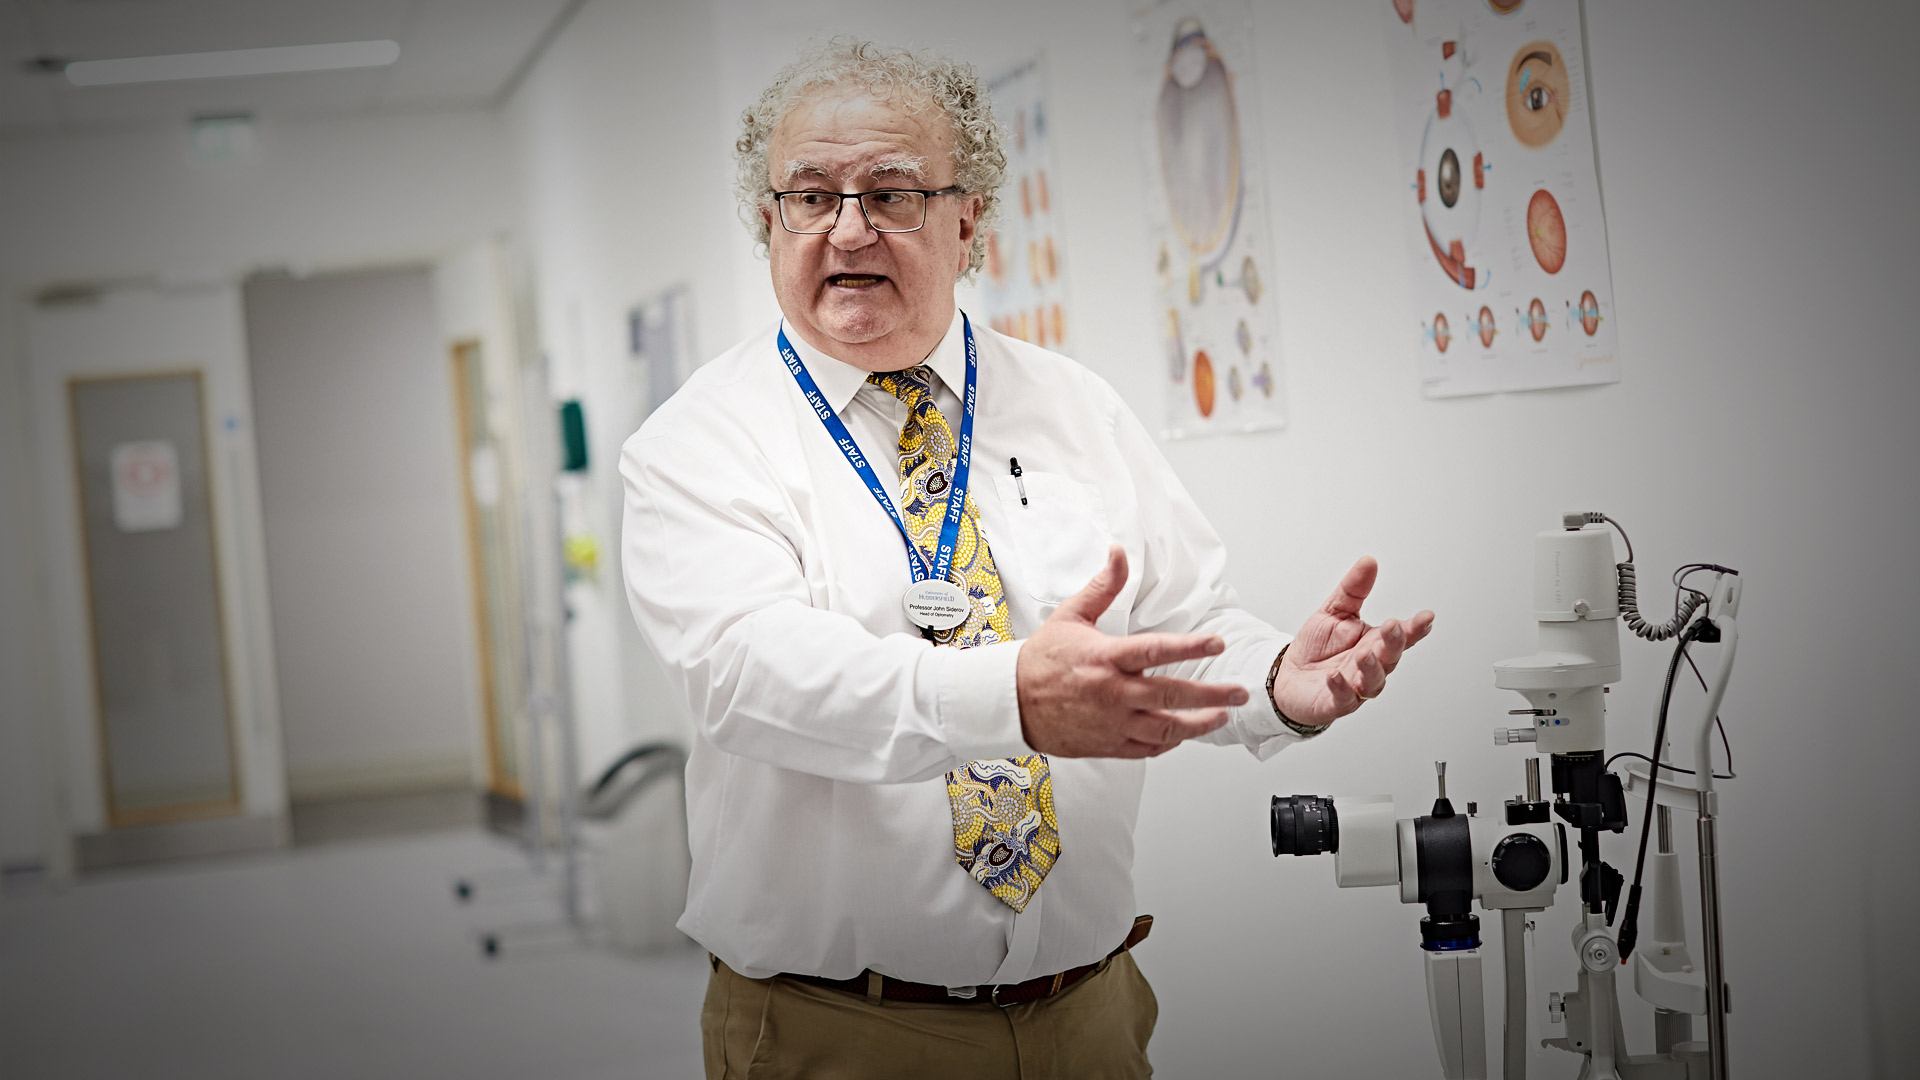 Professor John Siderov, Head of the Department of Optometry and Vision Sciences, shows the Chancellor Sir George Buckley around the new state-of-the-art facilities